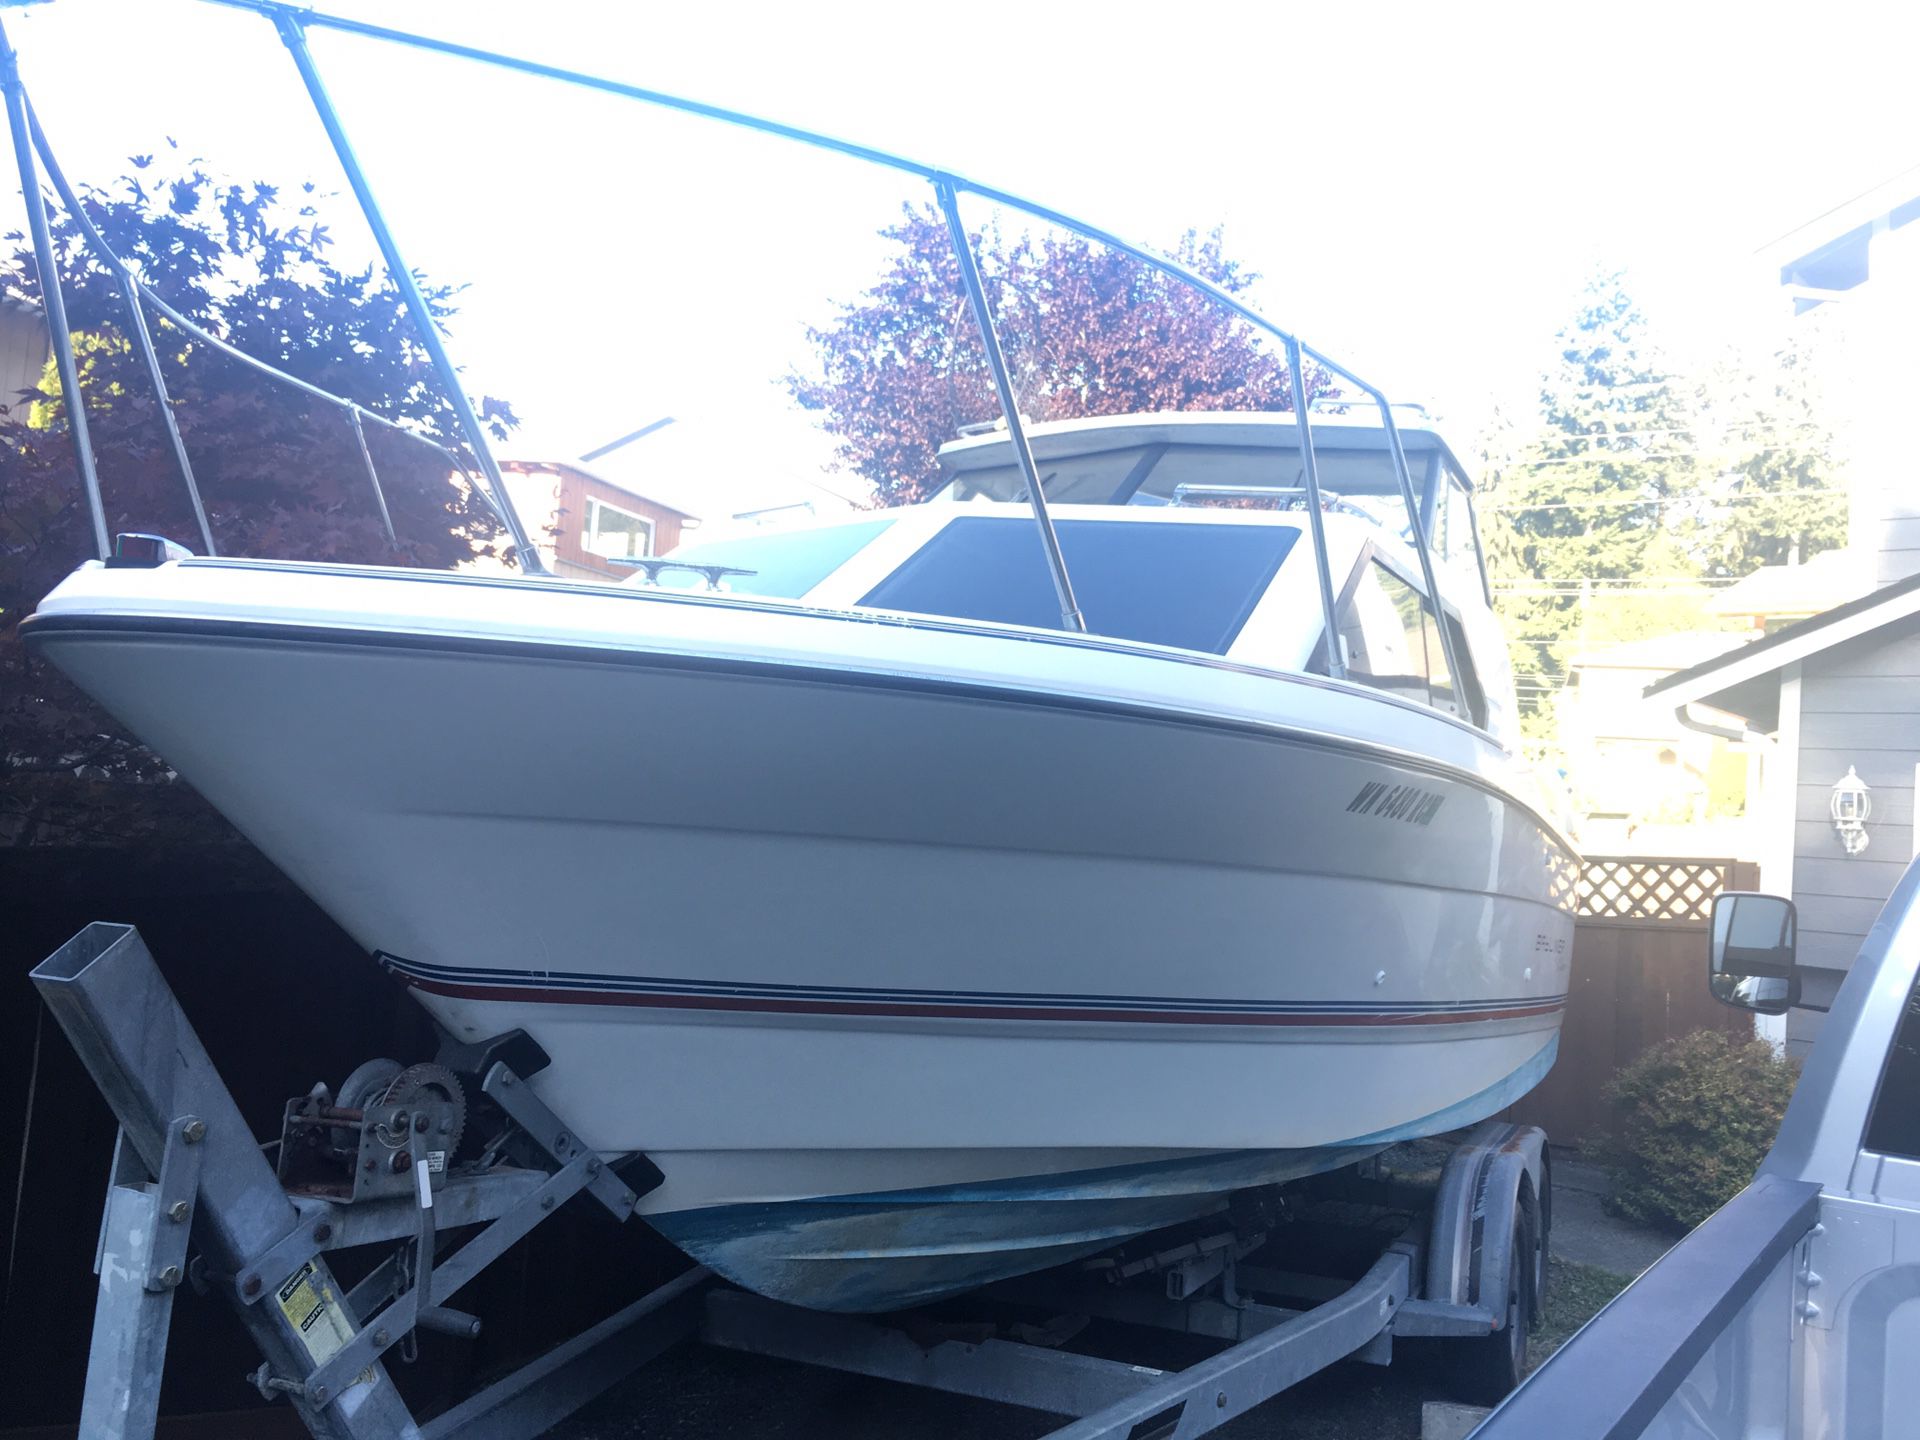 BOAT! 2452 Bayliner with cabin